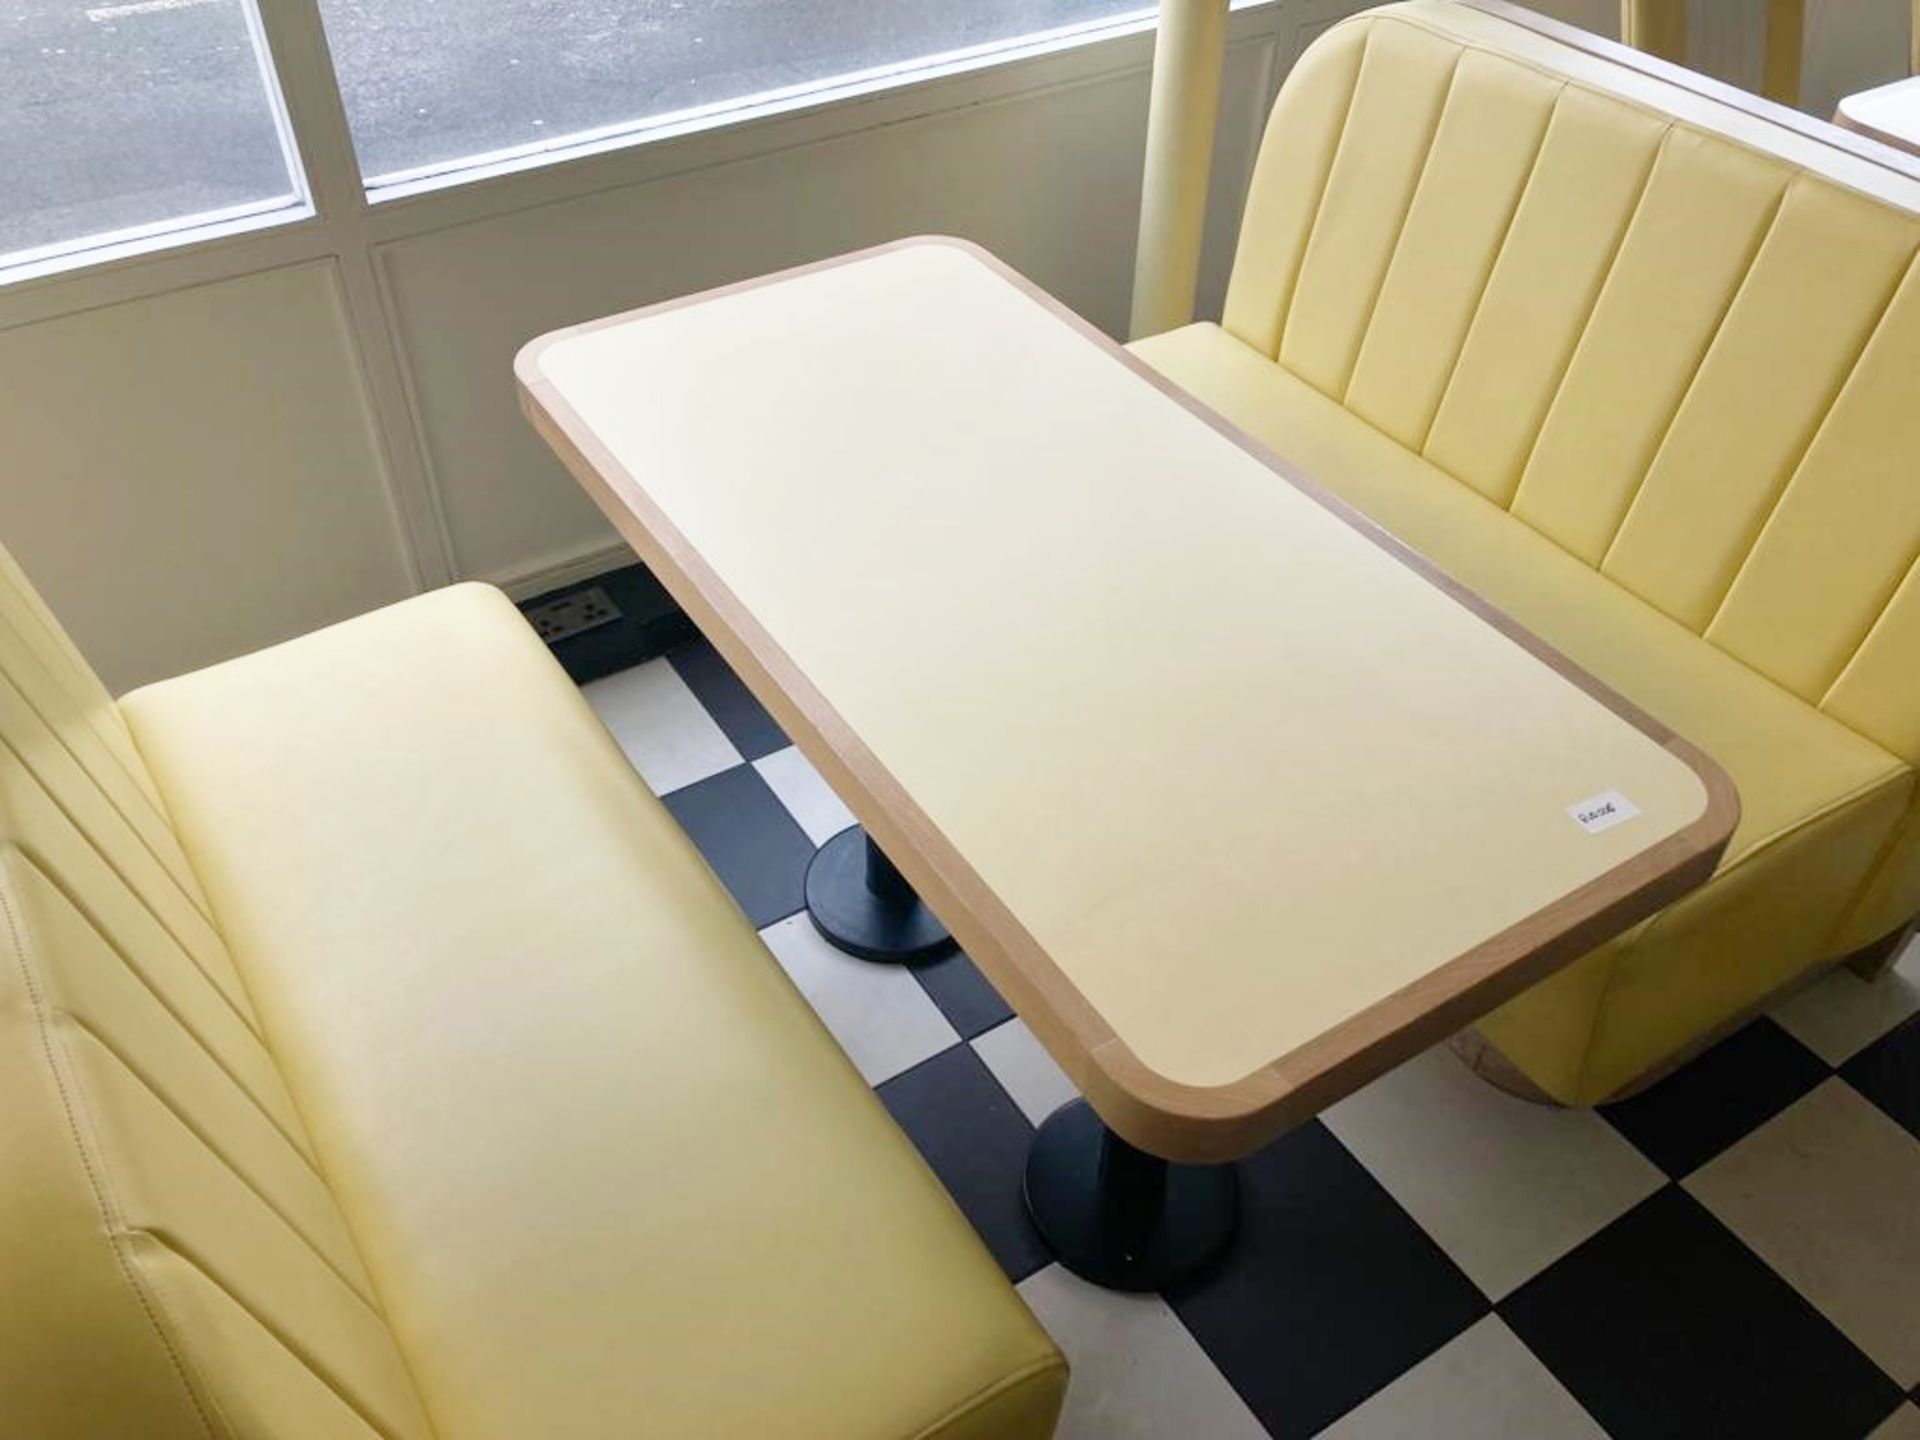 1 x Collection of Restaurant Seating Benches and Tables - Features a Light Wood and Faux Leather - Image 7 of 11